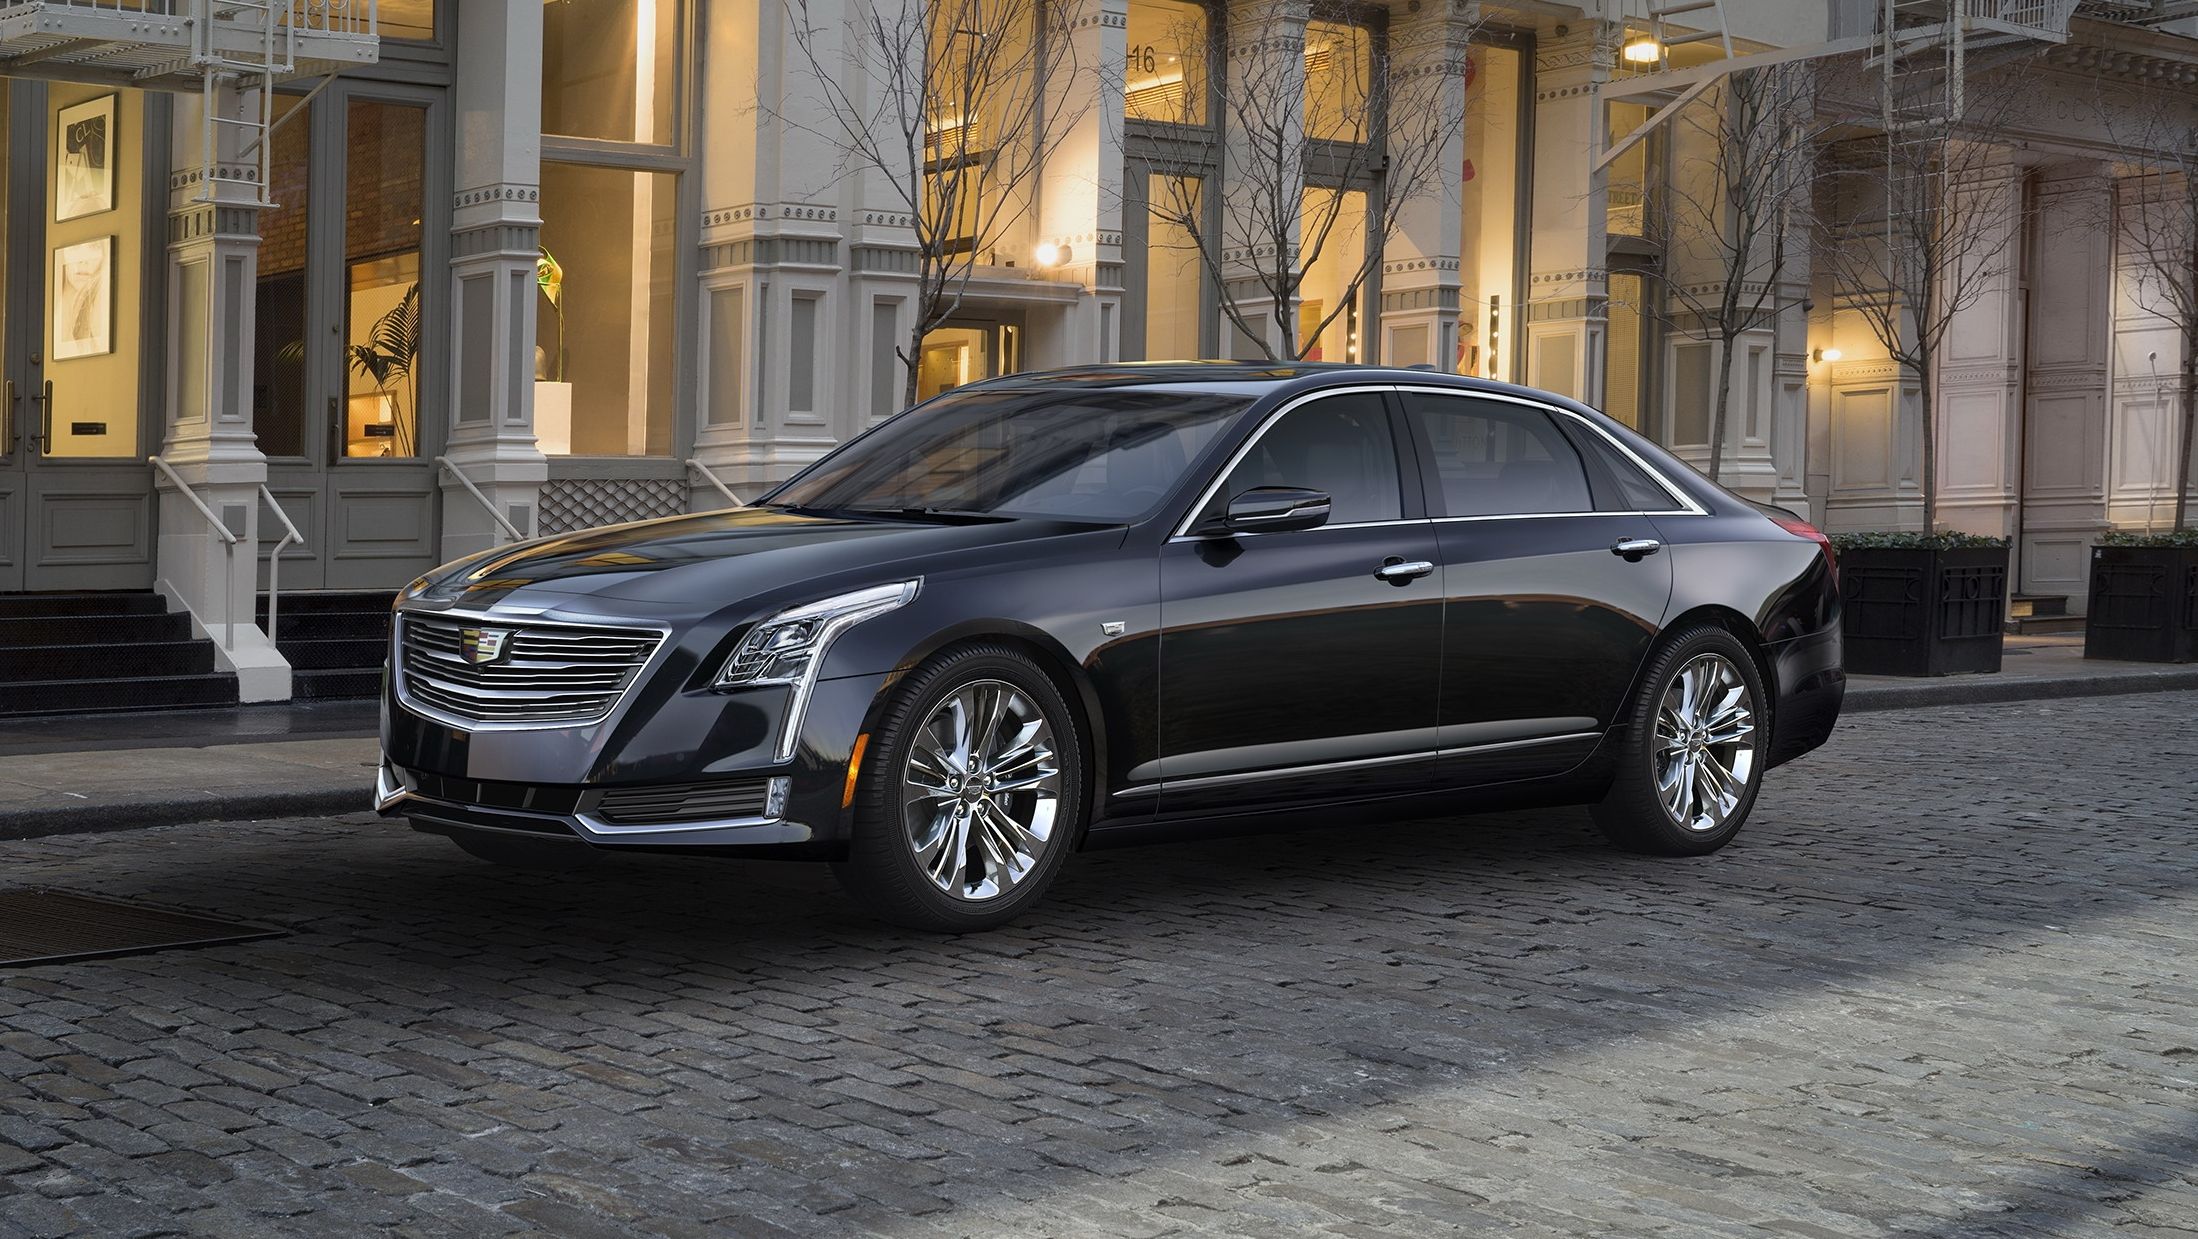 2015 First Cadillac CT6 Will Be Auctioned For Charity